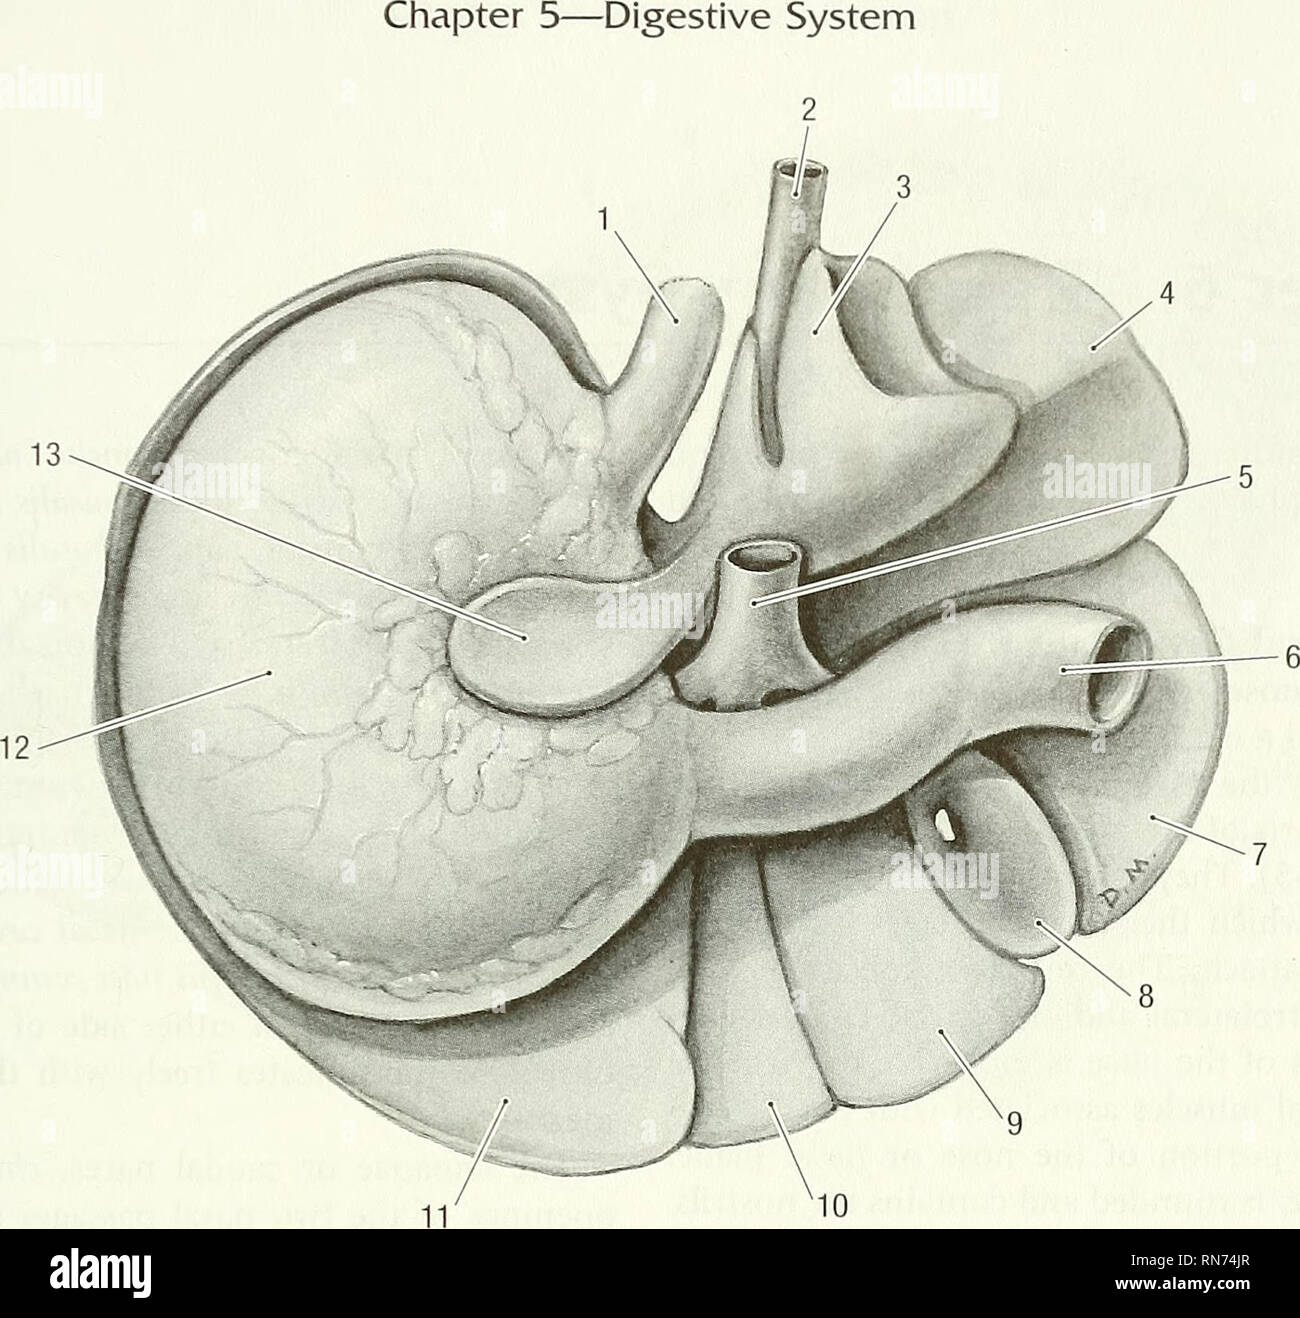 . Anatomy of the woodchuck (Marmota monax). Woodchuck; Mammals. 99 Fig. 5-14. Visceral surface of liver and stomach. 1 esophagus, 2 caudal vena cava, 3 caudate process, 4 right lateral lobe, 5 hepatic portal v., 6 duodenum, 7 right medial lobe, 8 gall bladder, 9 quadrate lobe, 10 left medial lobe, 11 left lateral lobe, 12 stomach, 13 papillary process. pancreas and opens into the ascending duodenum at the lesser duodenal papilla, about 20 cm from the pylorus. Blood supply: The cranial and caudal pancreati- coduodenal arteries are the main supply to the right lobe, while the pancreatic branch o Stock Photo